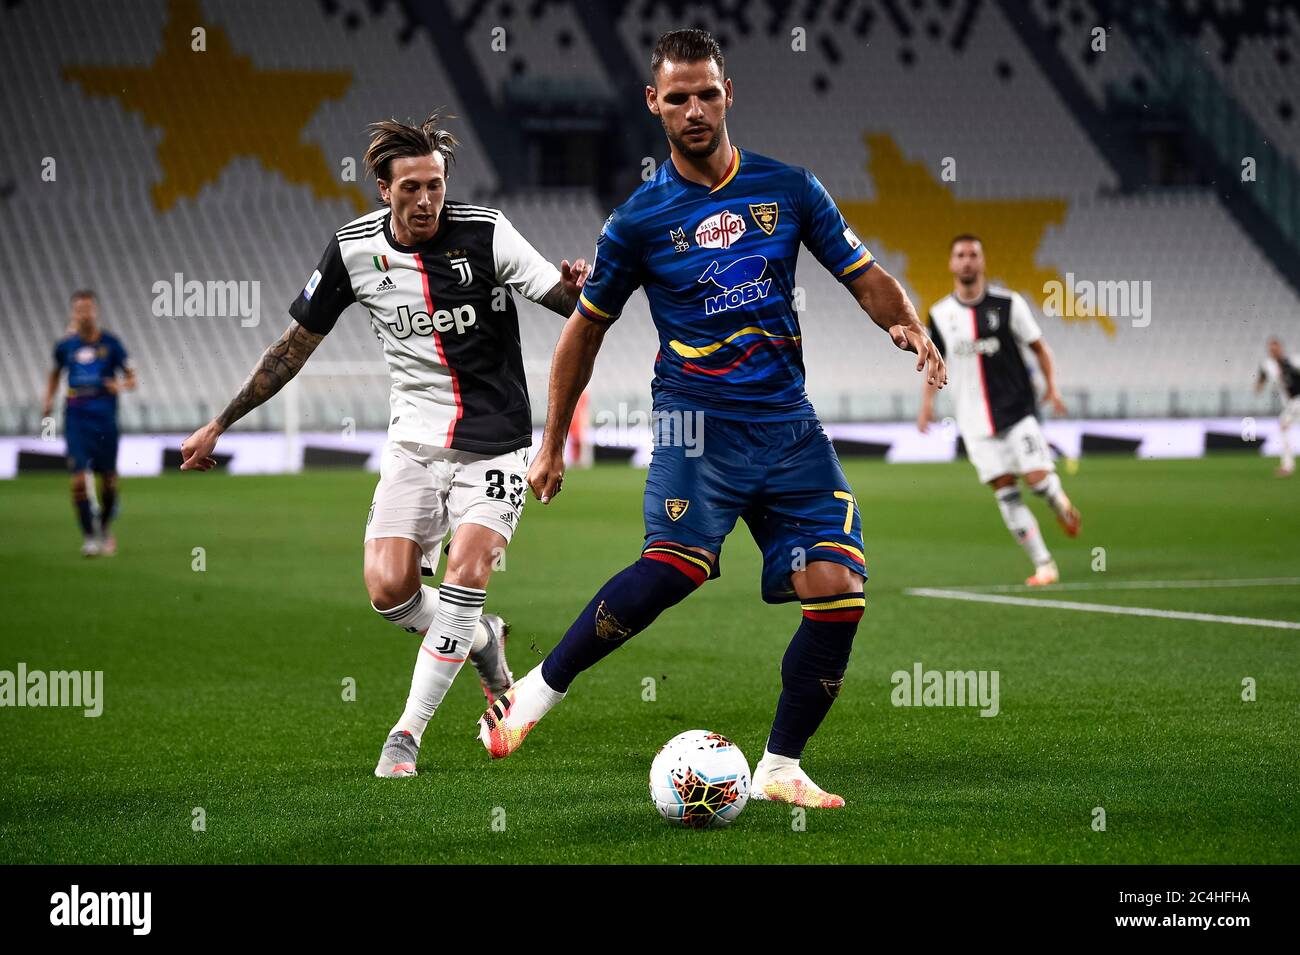 Turin, Italy - 26 June, 2020: Panagiotis Tachtsidis of US Lecce is challenged by Federico Bernardeschi of Juventus FC during the Serie A football match between Juventus FC and US Lecce. Juventus FC won 4-0 over US Lecce. Credit: Nicolò Campo/Alamy Live News Stock Photo